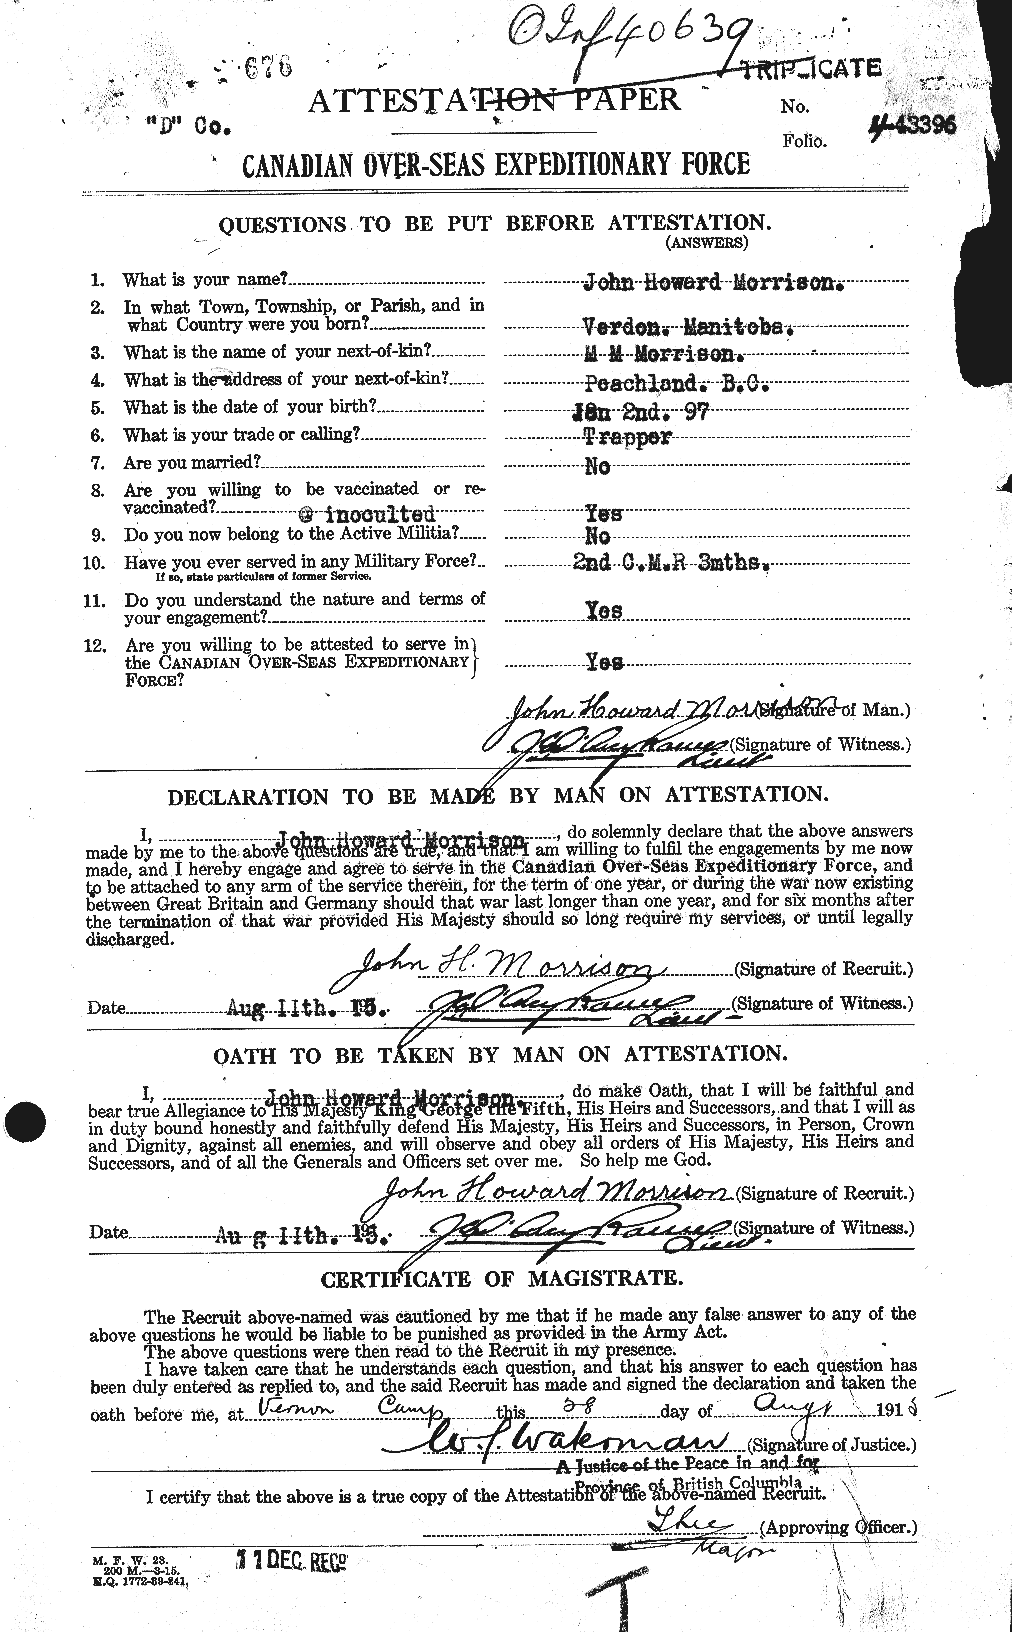 Personnel Records of the First World War - CEF 507039a